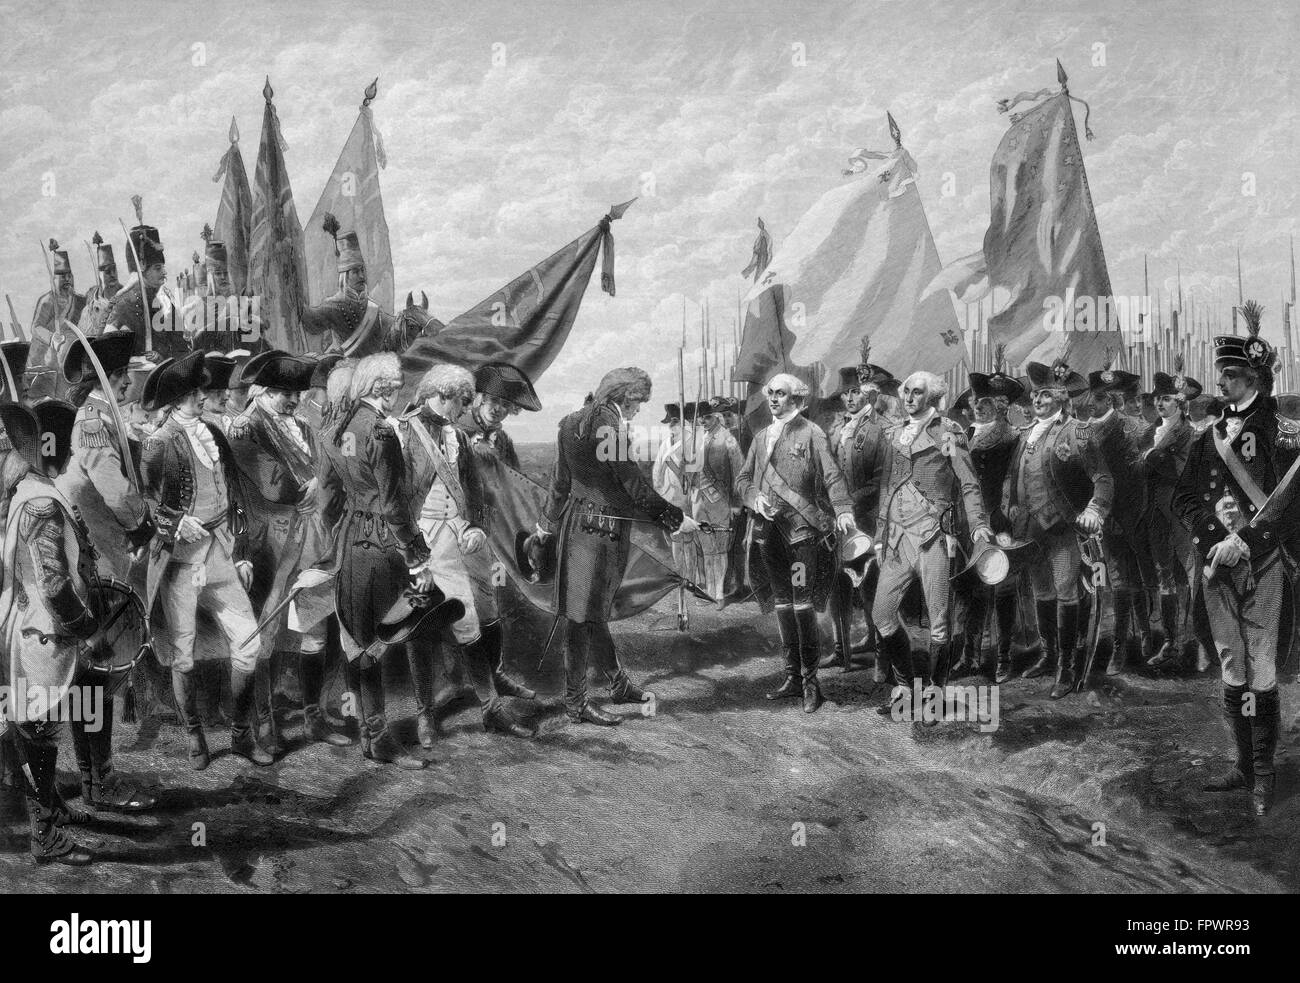 Vintage Revolutionary War print showing the surrender of British troops to General George Washington and the Continental Army. Stock Photo